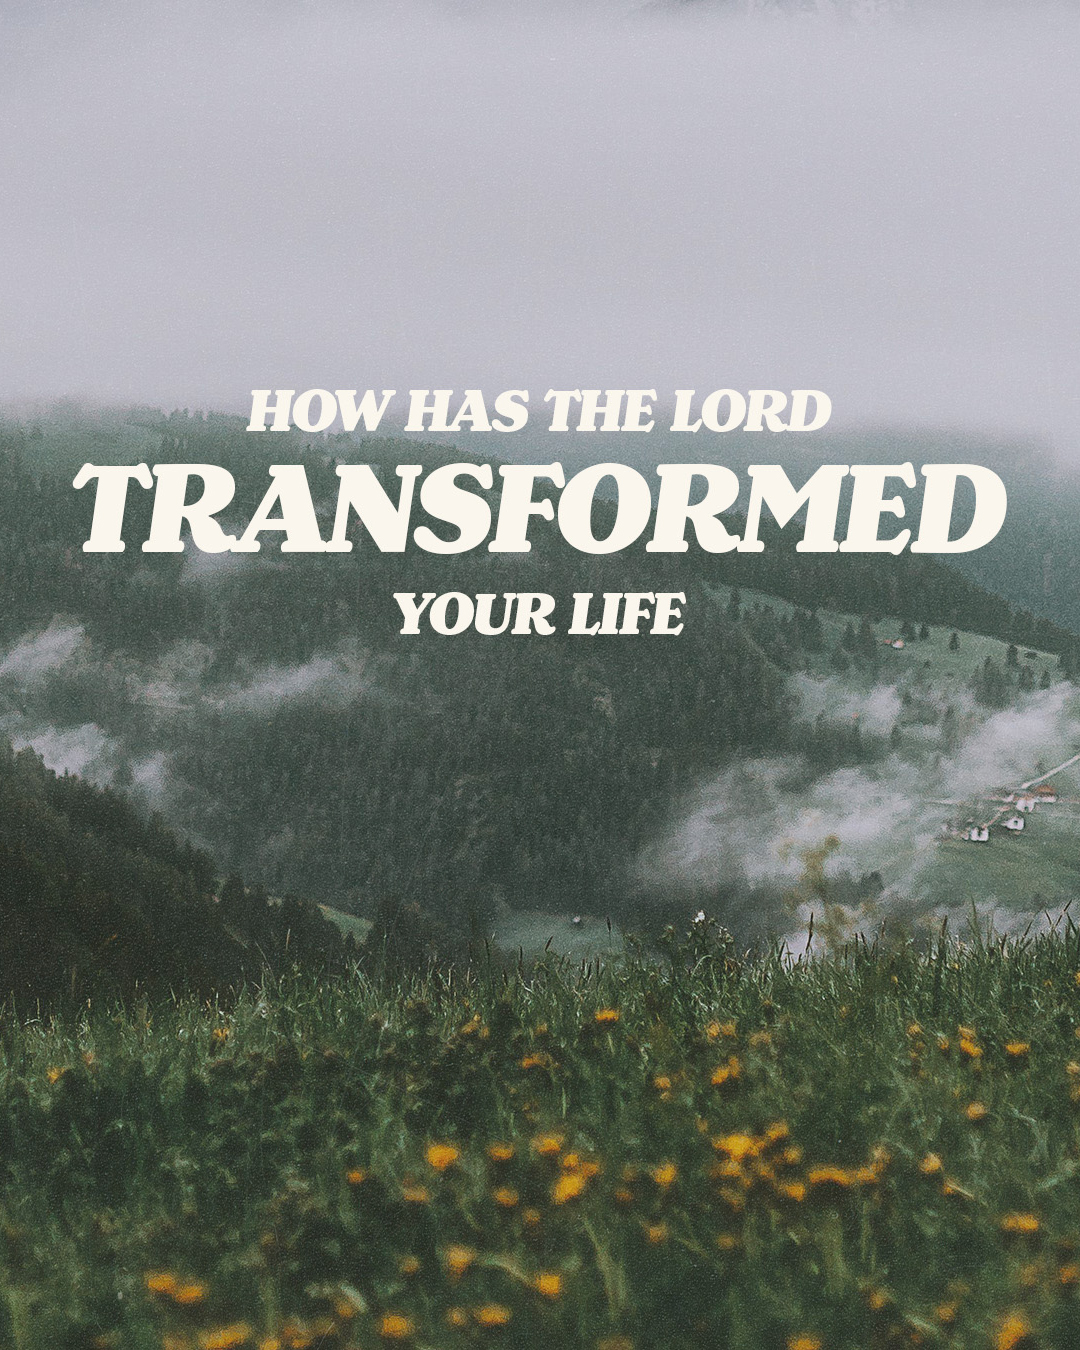 How has the Lord transformed your life